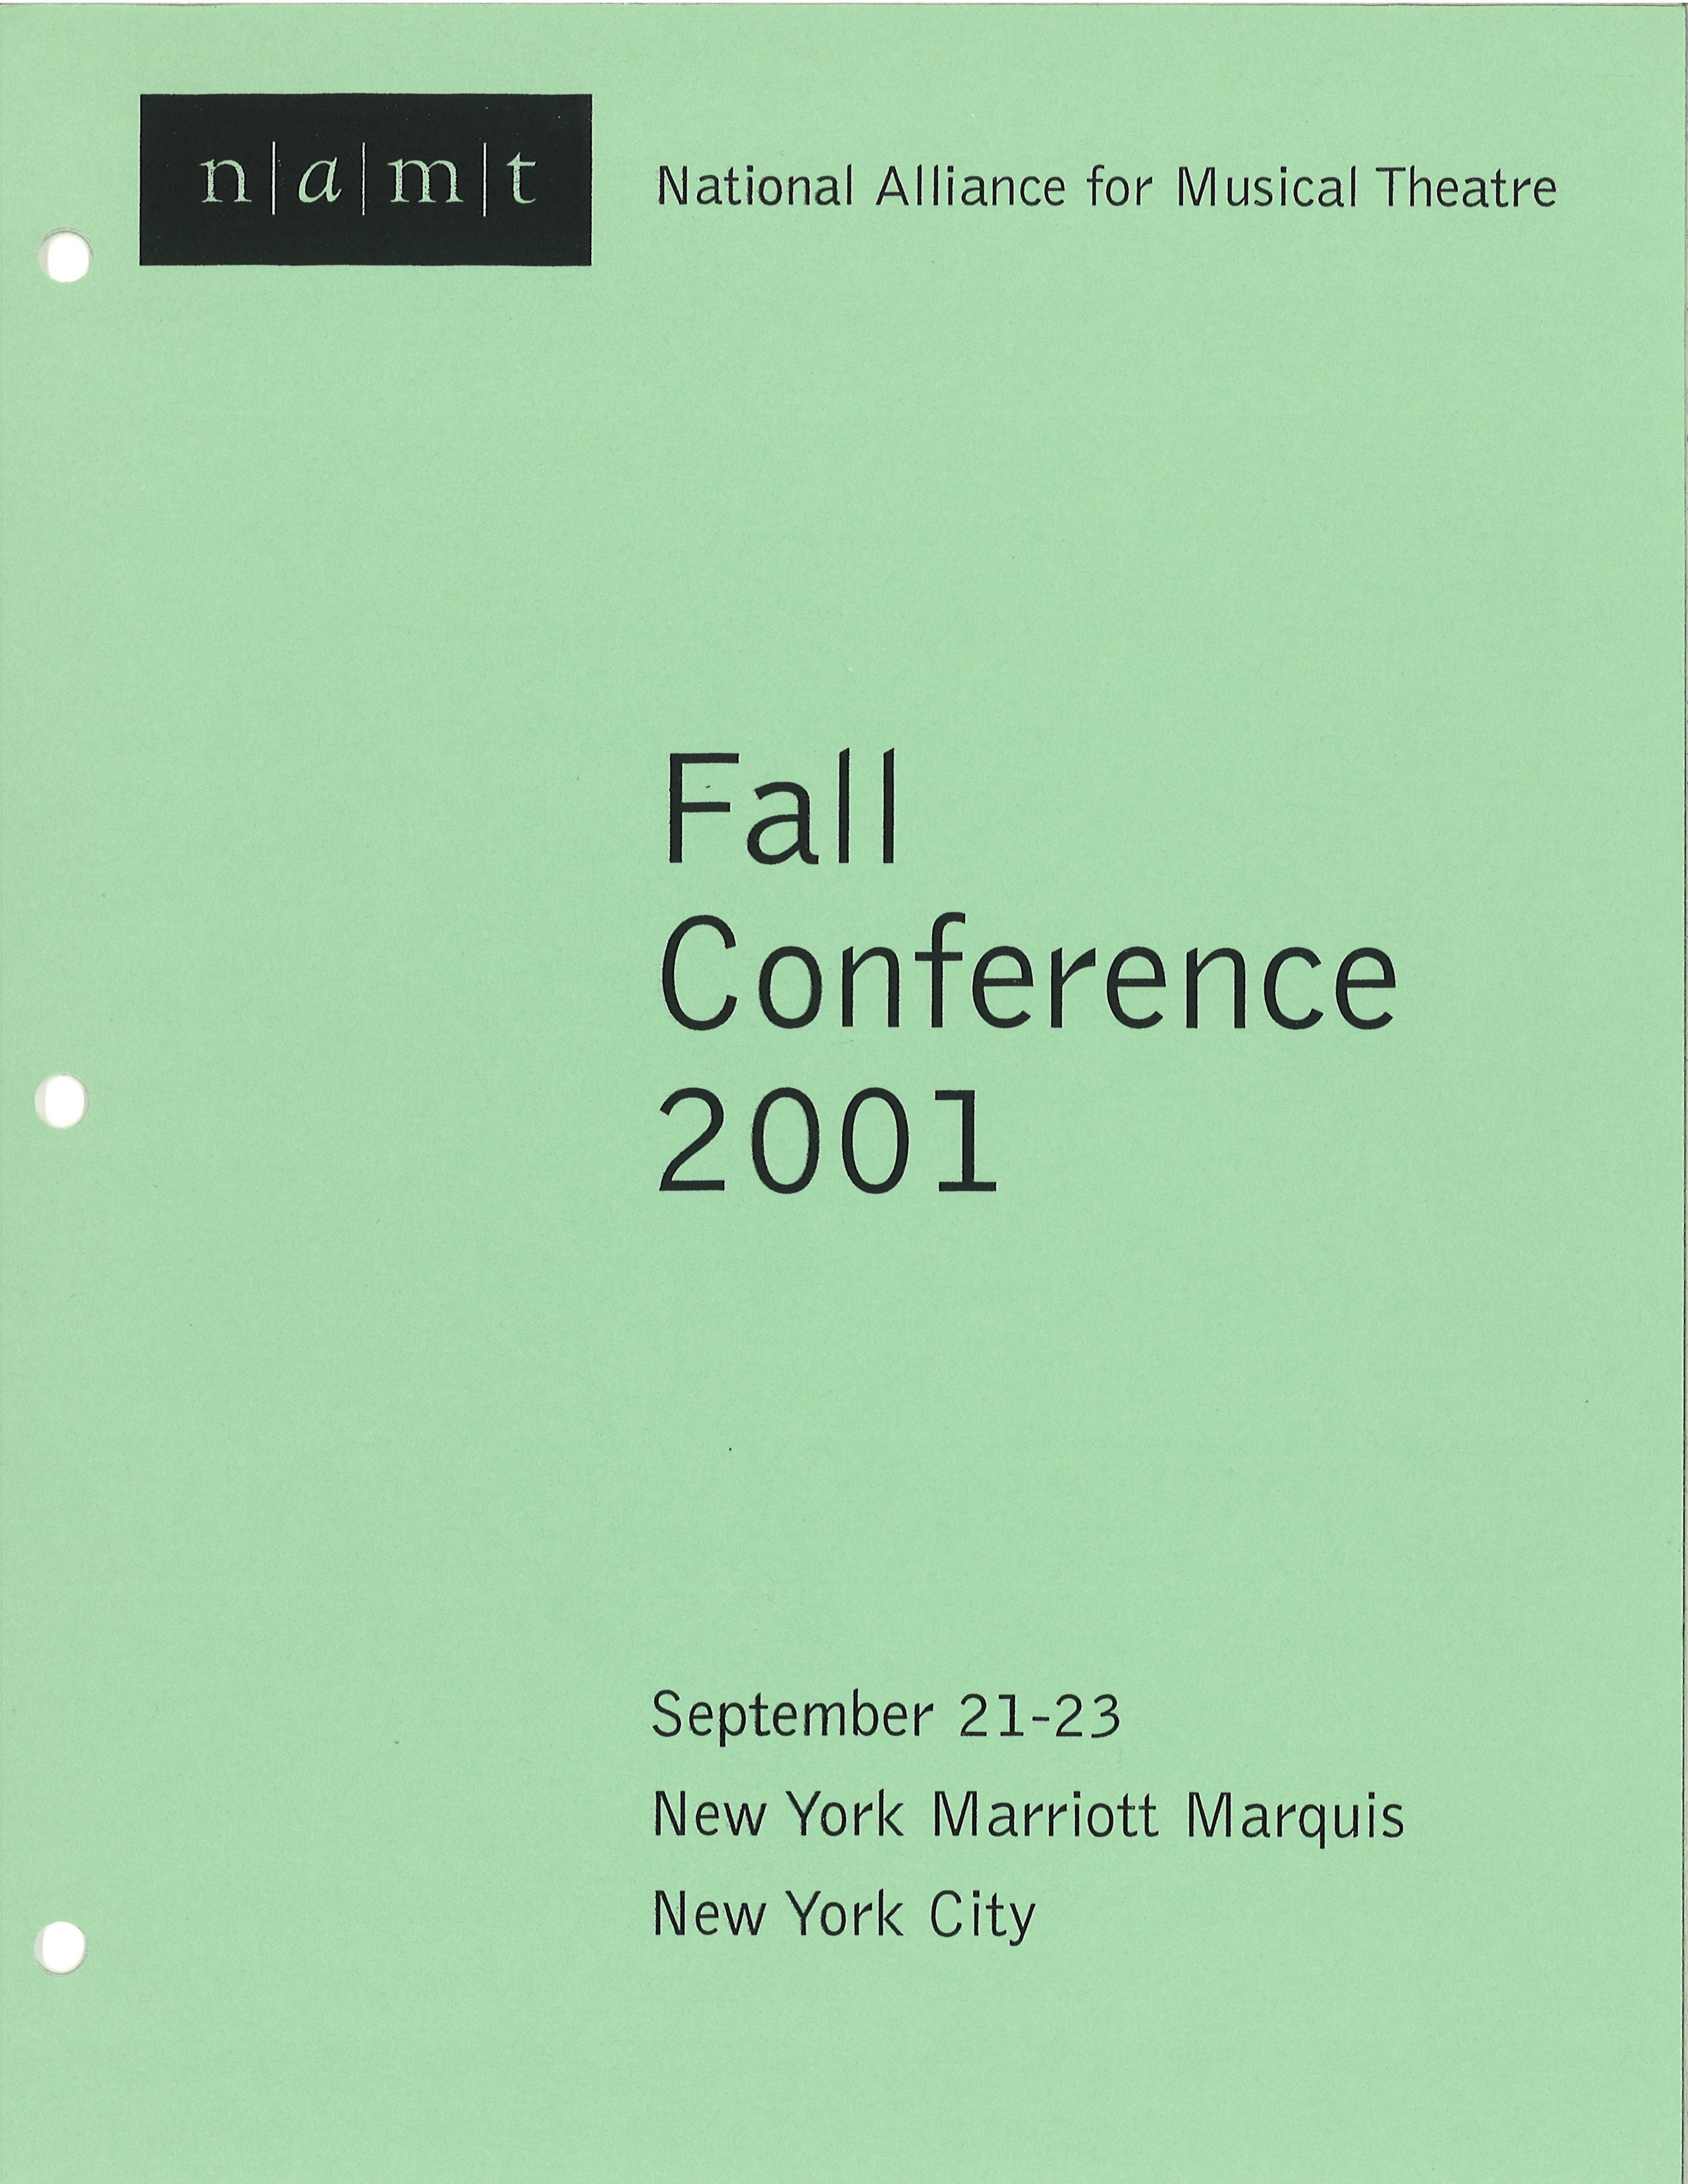 Fall Conference 2001 Logo